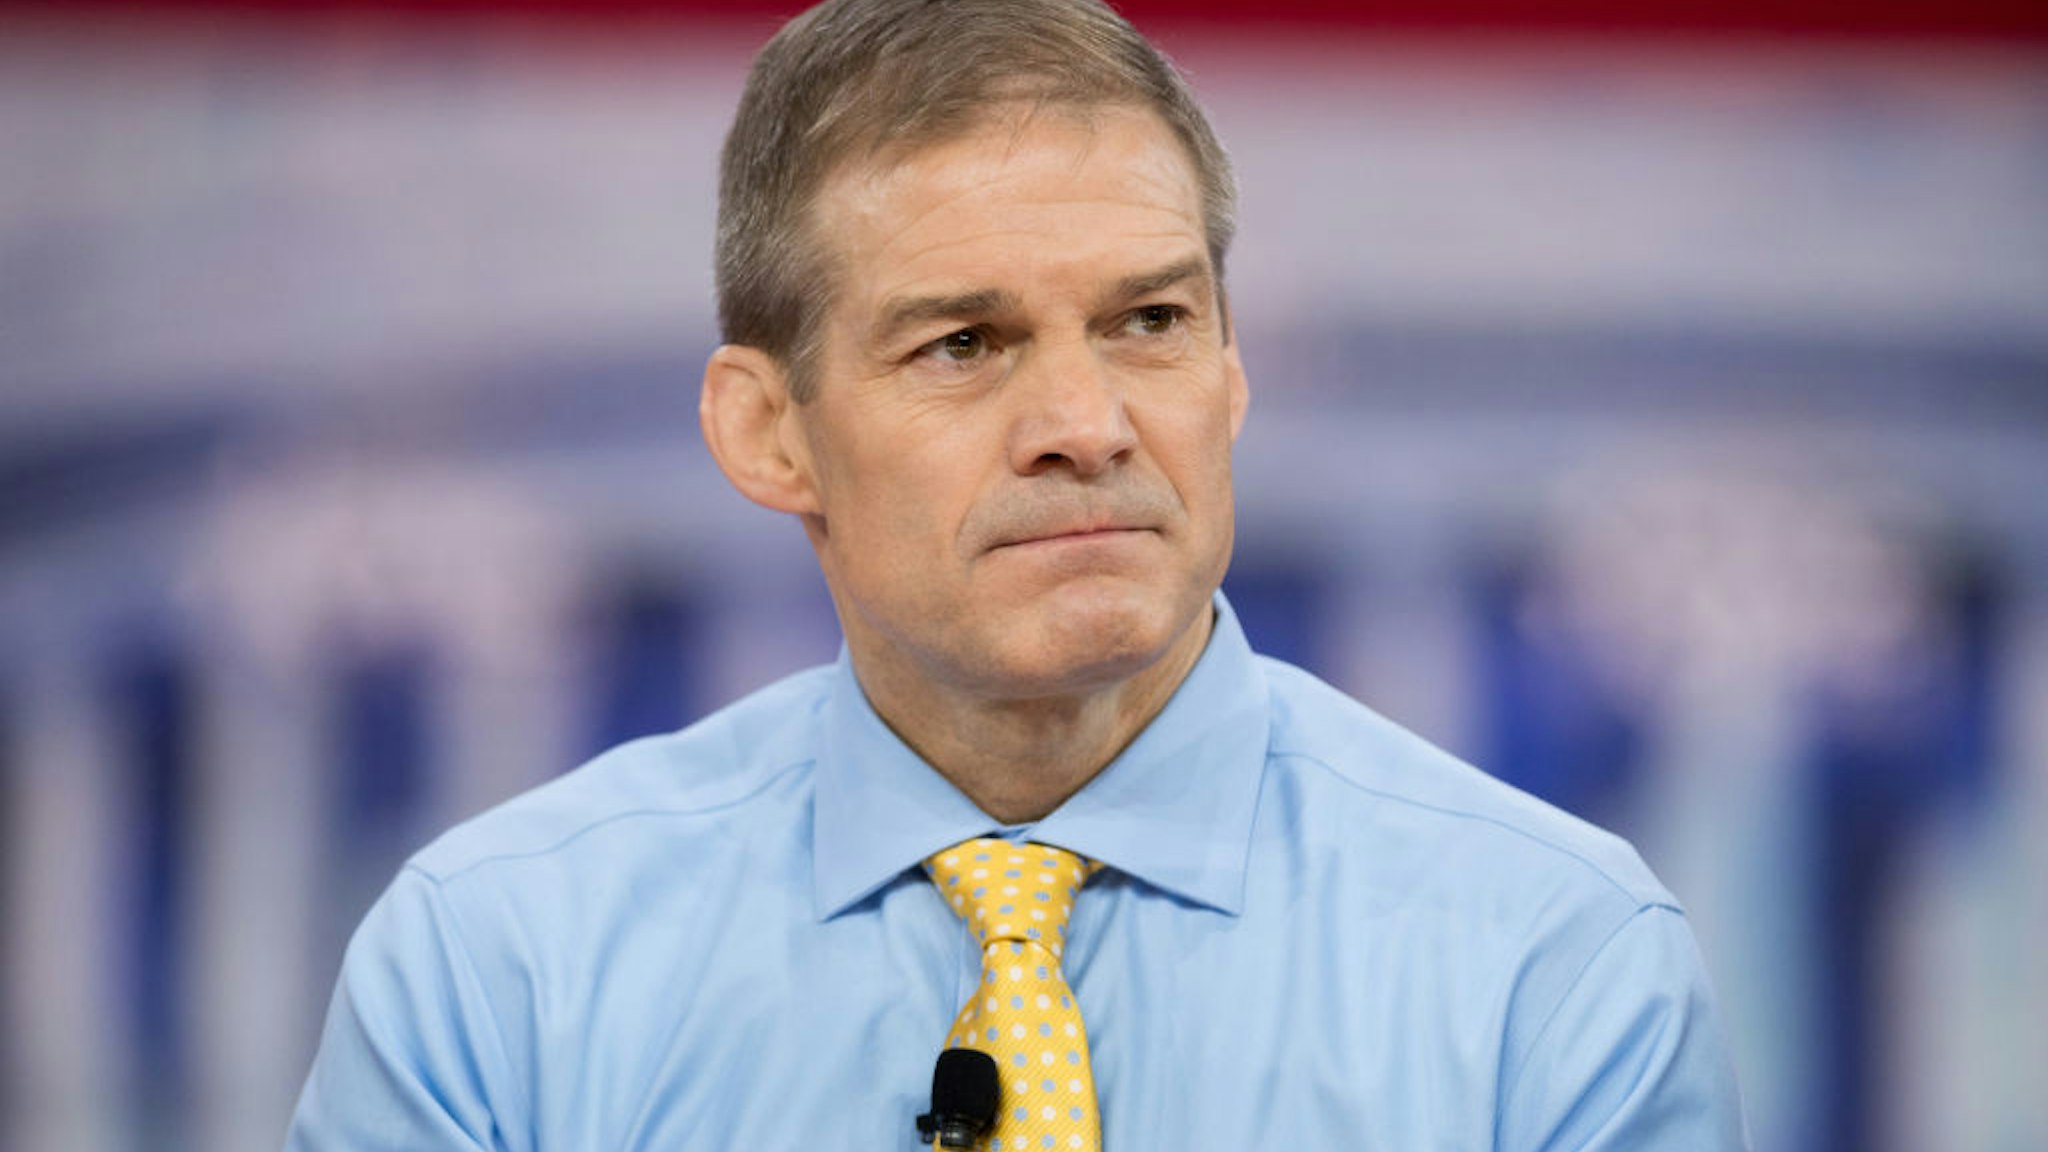 OXON HILL, MD, UNITED STATES - 2018/02/23: Representative Jim Jordan (R), Representative for Ohio's 4th congressional district, at the Conservative Political Action Conference (CPAC) sponsored by the American Conservative Union held at the Gaylord National Resort &amp; Convention Center in Oxon Hill. (Photo by Michael Brochstein/SOPA Images/LightRocket via Getty Images)